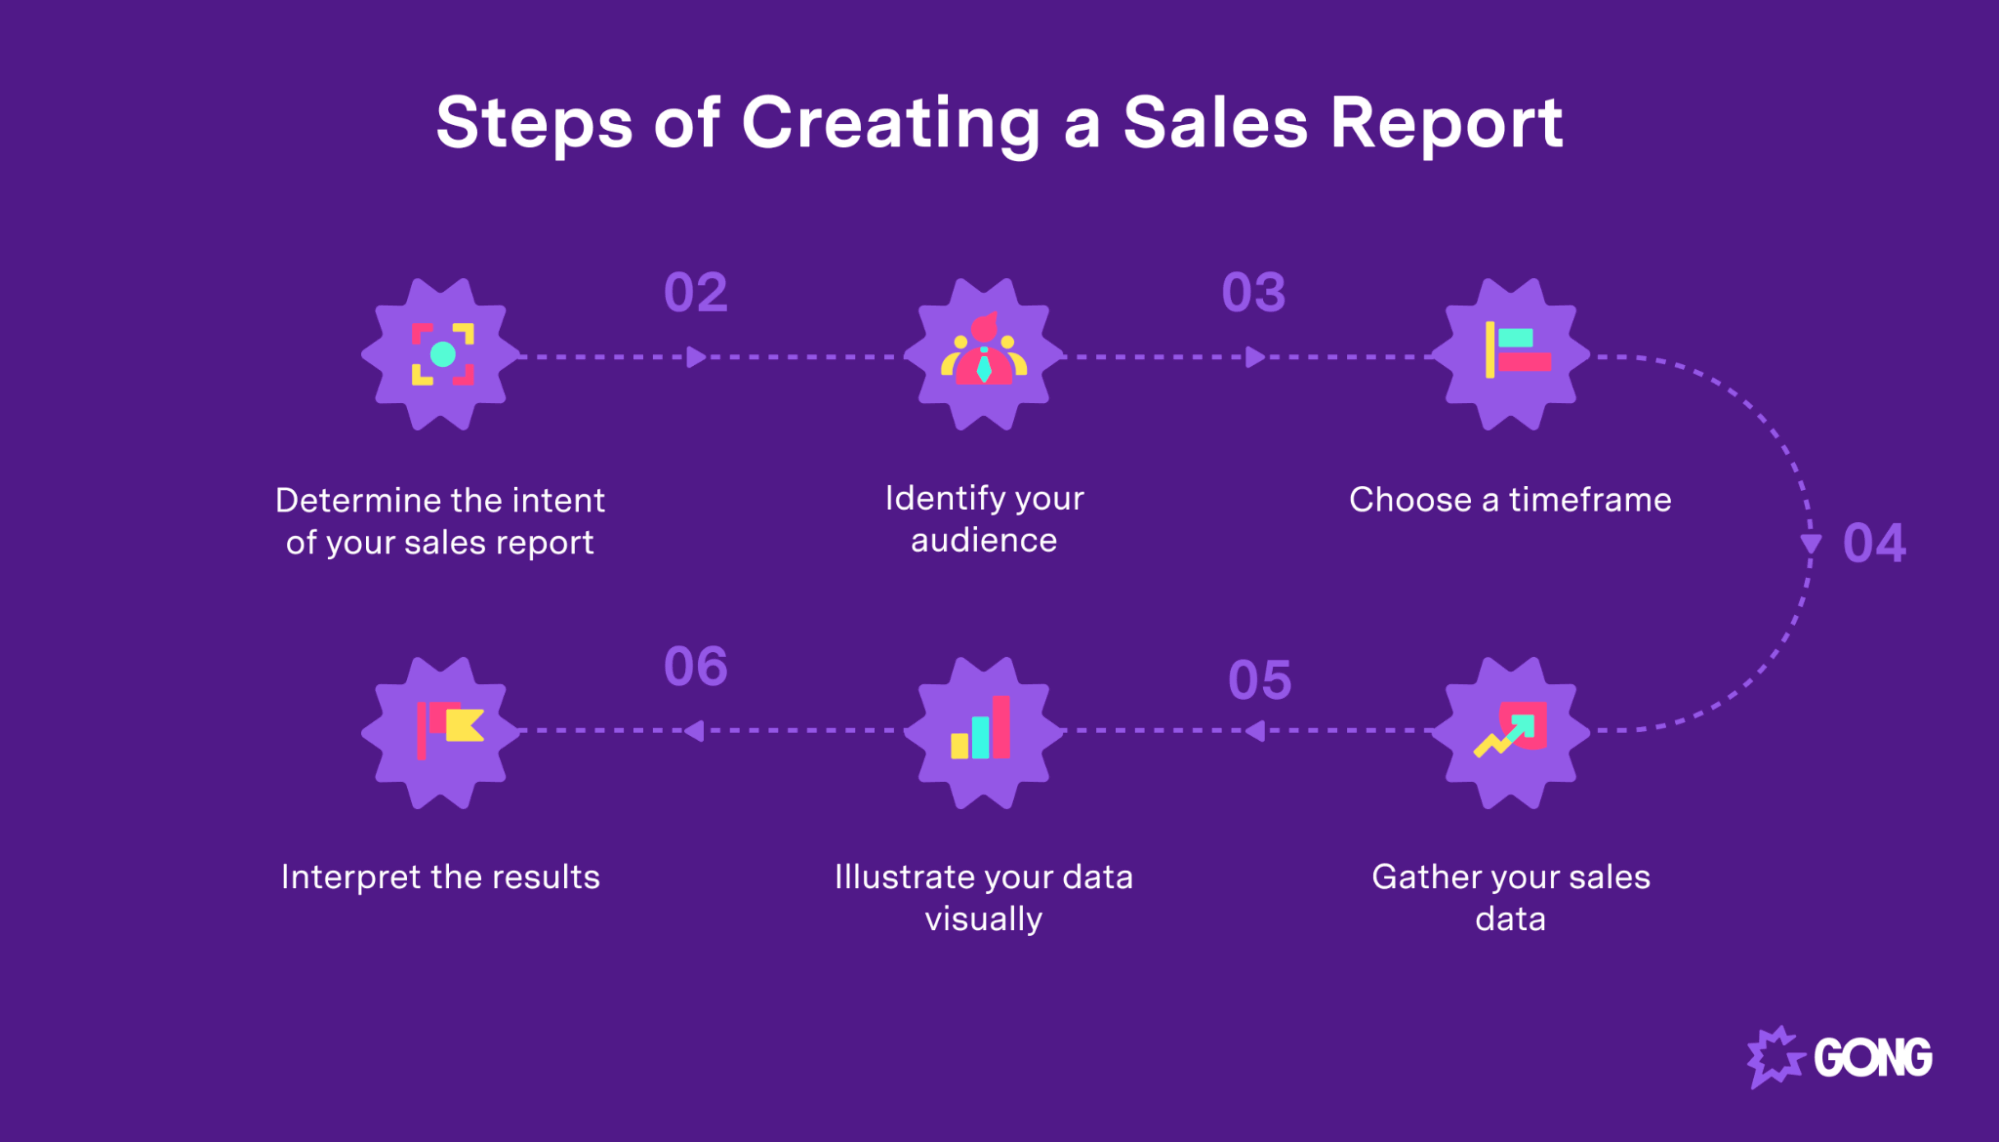 How to create a sales report